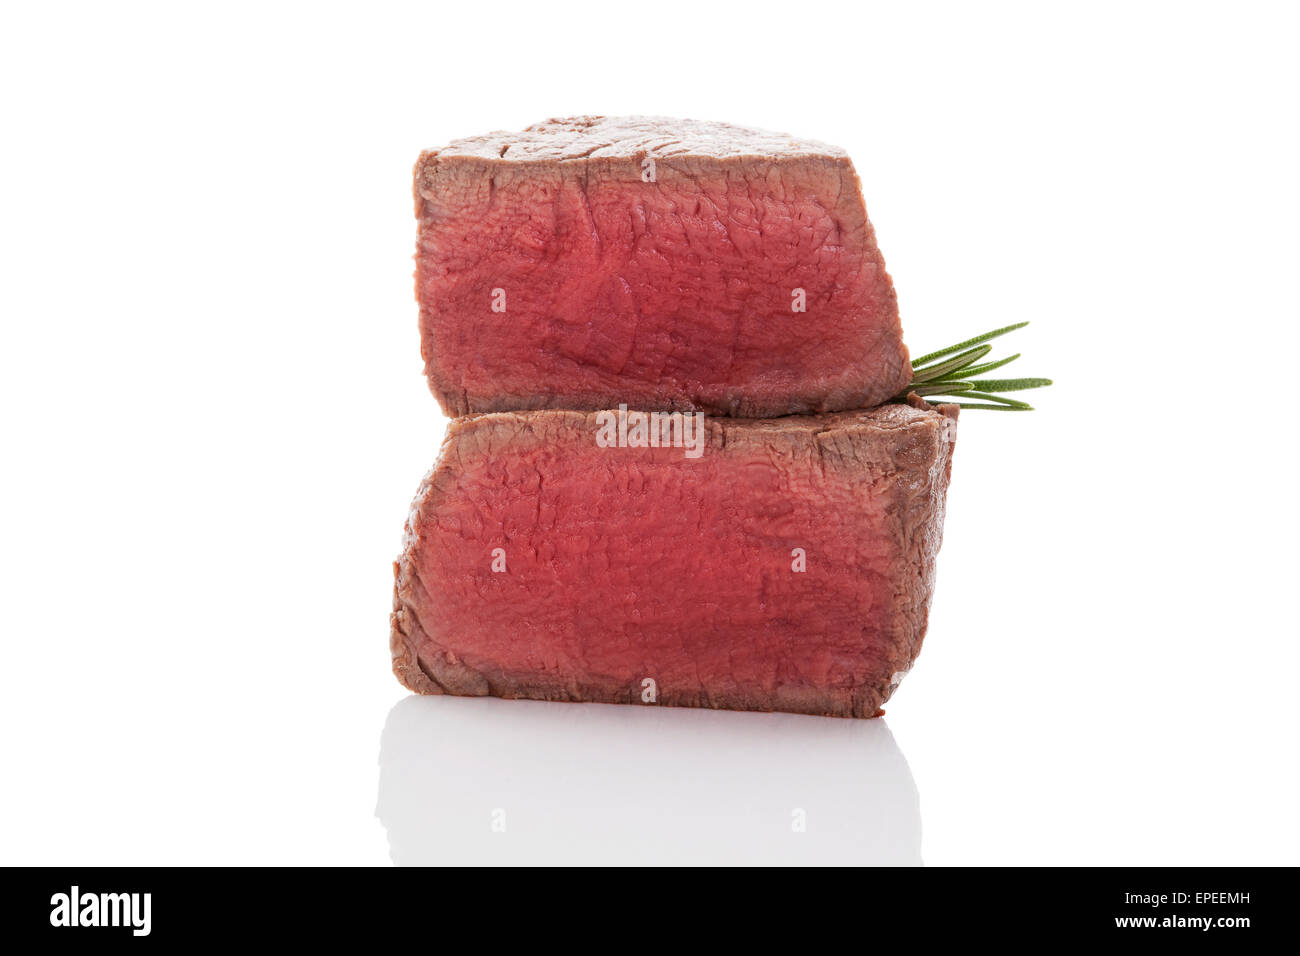 Beefsteak. Big steak with fresh herbs isolated on white background. Culinary red meat eating. Stock Photo